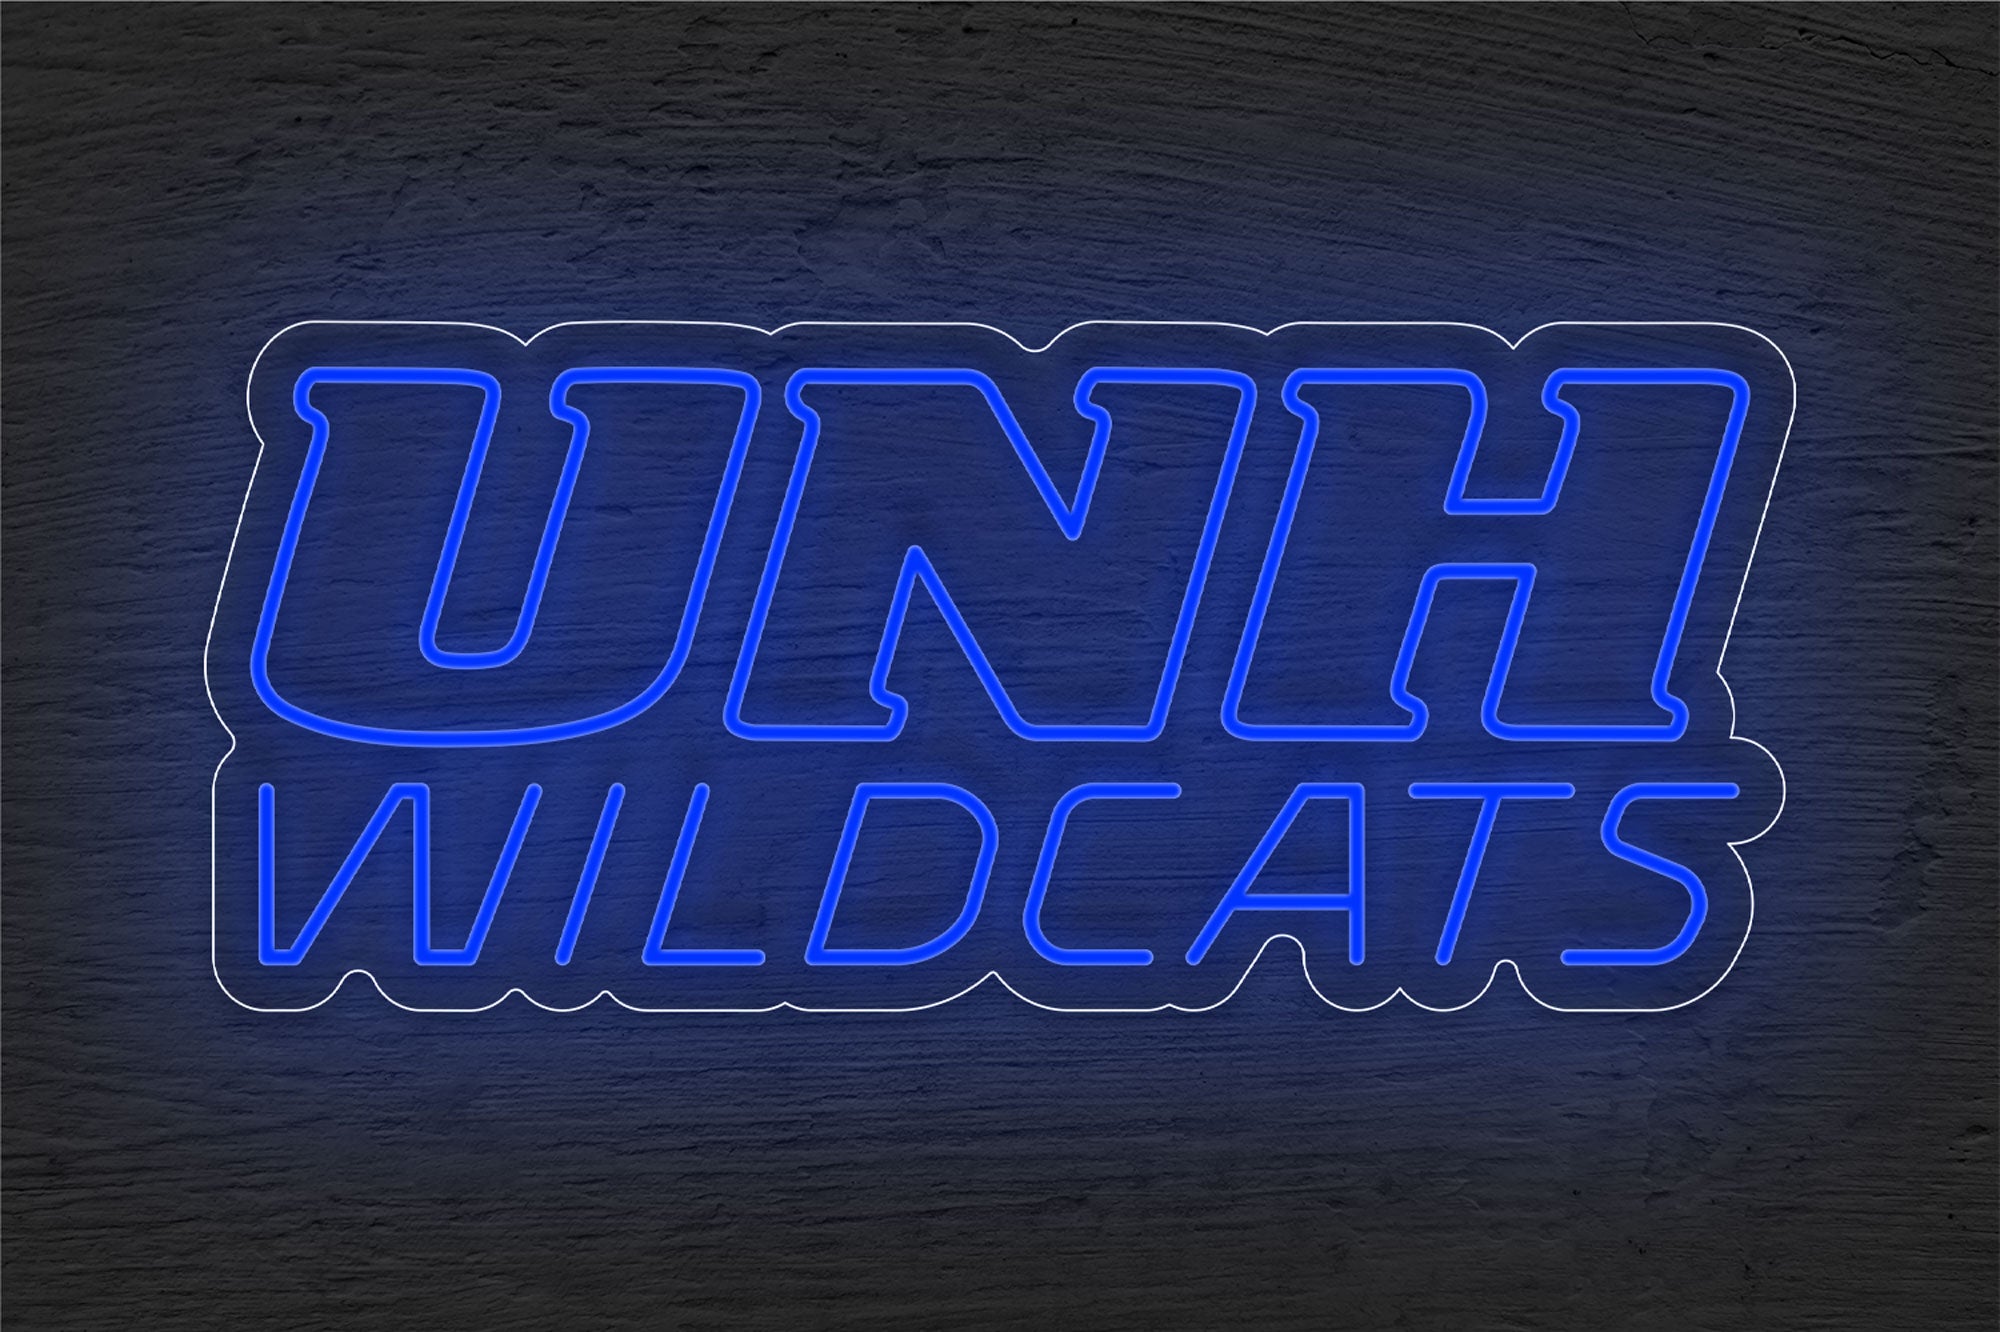 New Hampshire Wildcats Men's Basketball LED Neon Sign